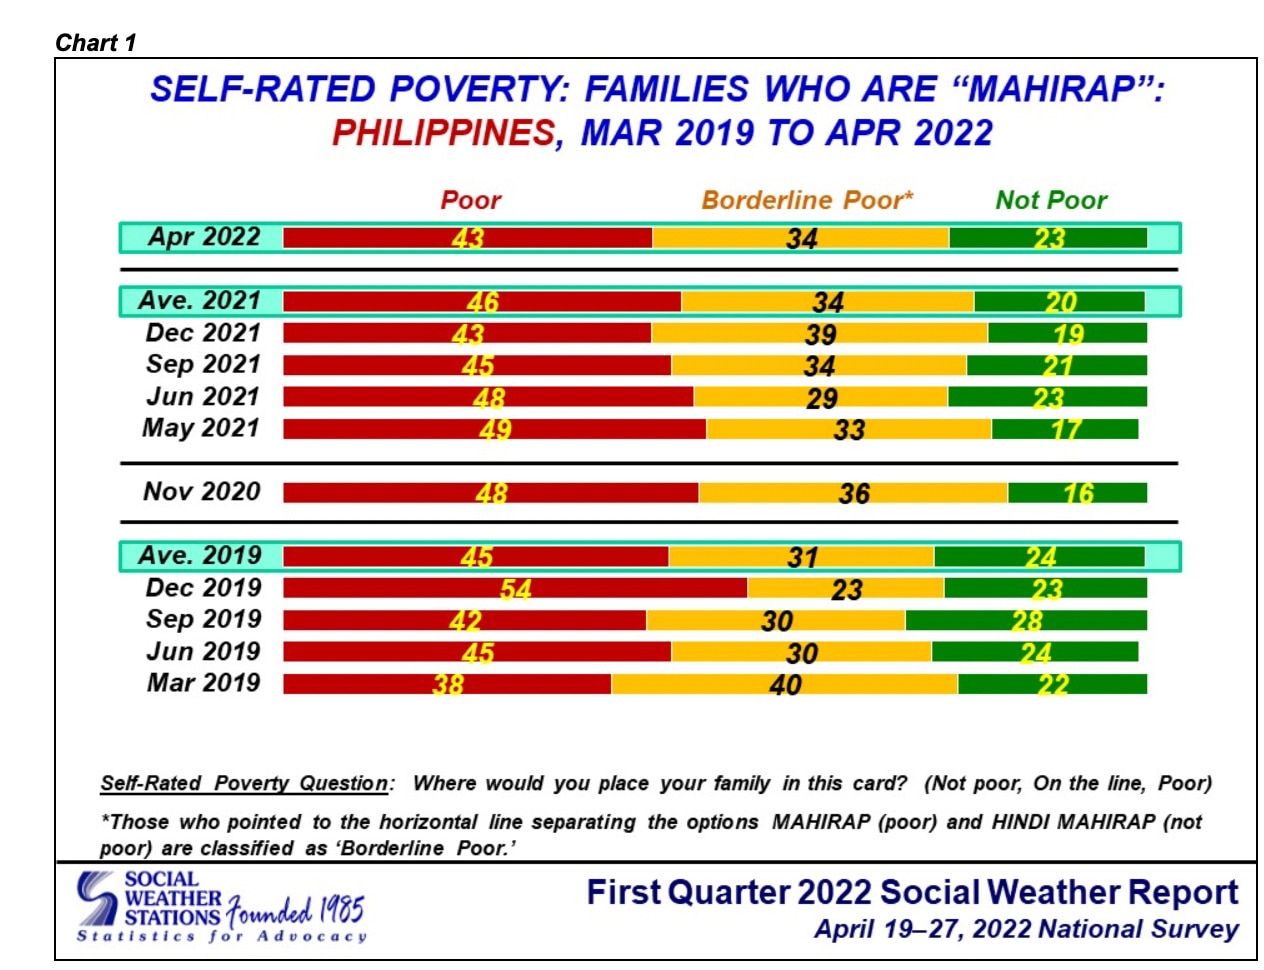 SWS survey : 4 out of 10 of Filipino families say they feel poor